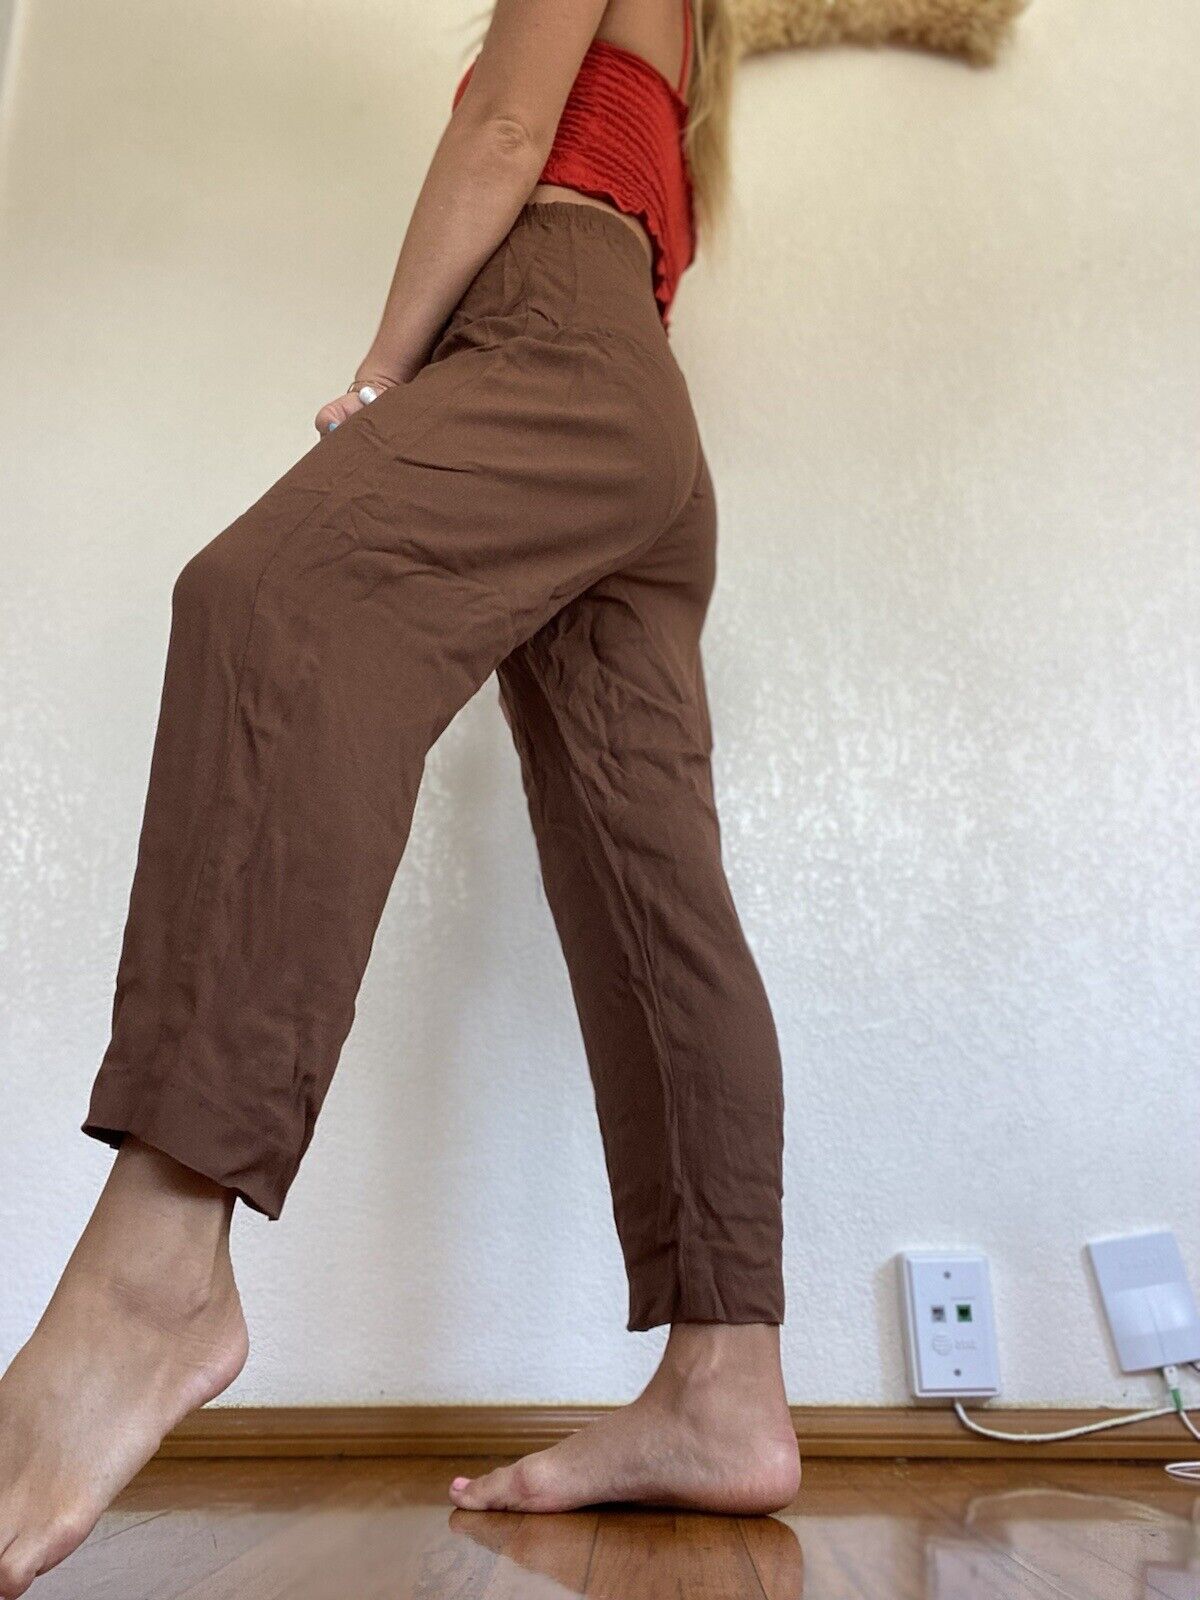 Vintage Brown Trousers - Unbranded - Size M/L